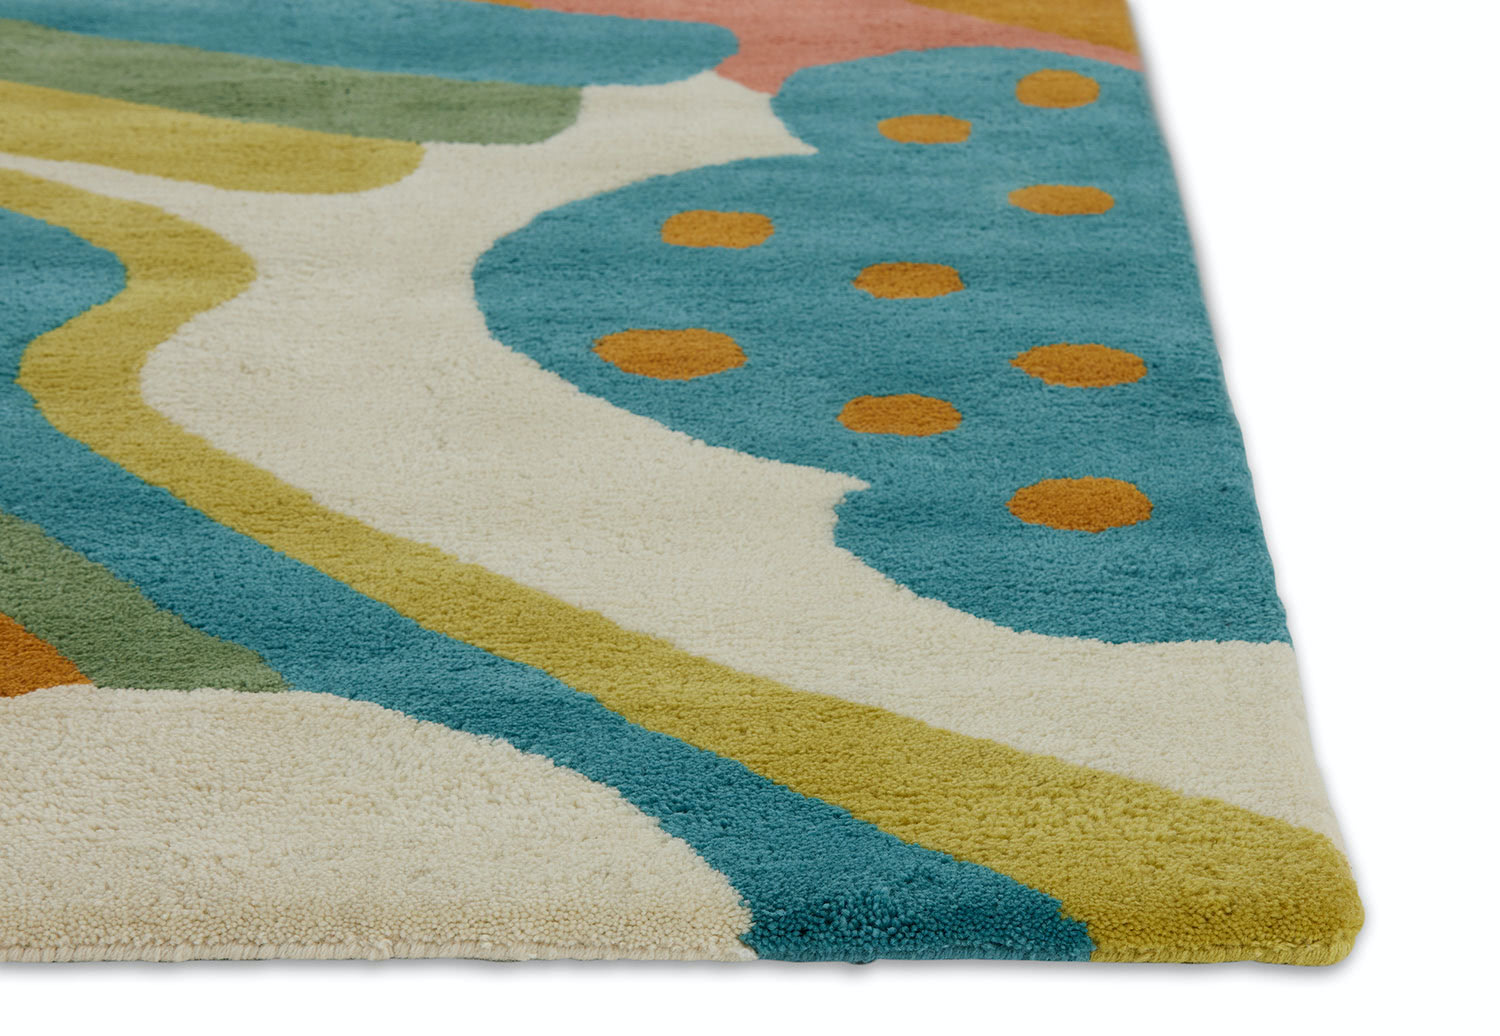 A detail corner of a multi-colored, modern area rug by Angela Adams called Daytrip Happy